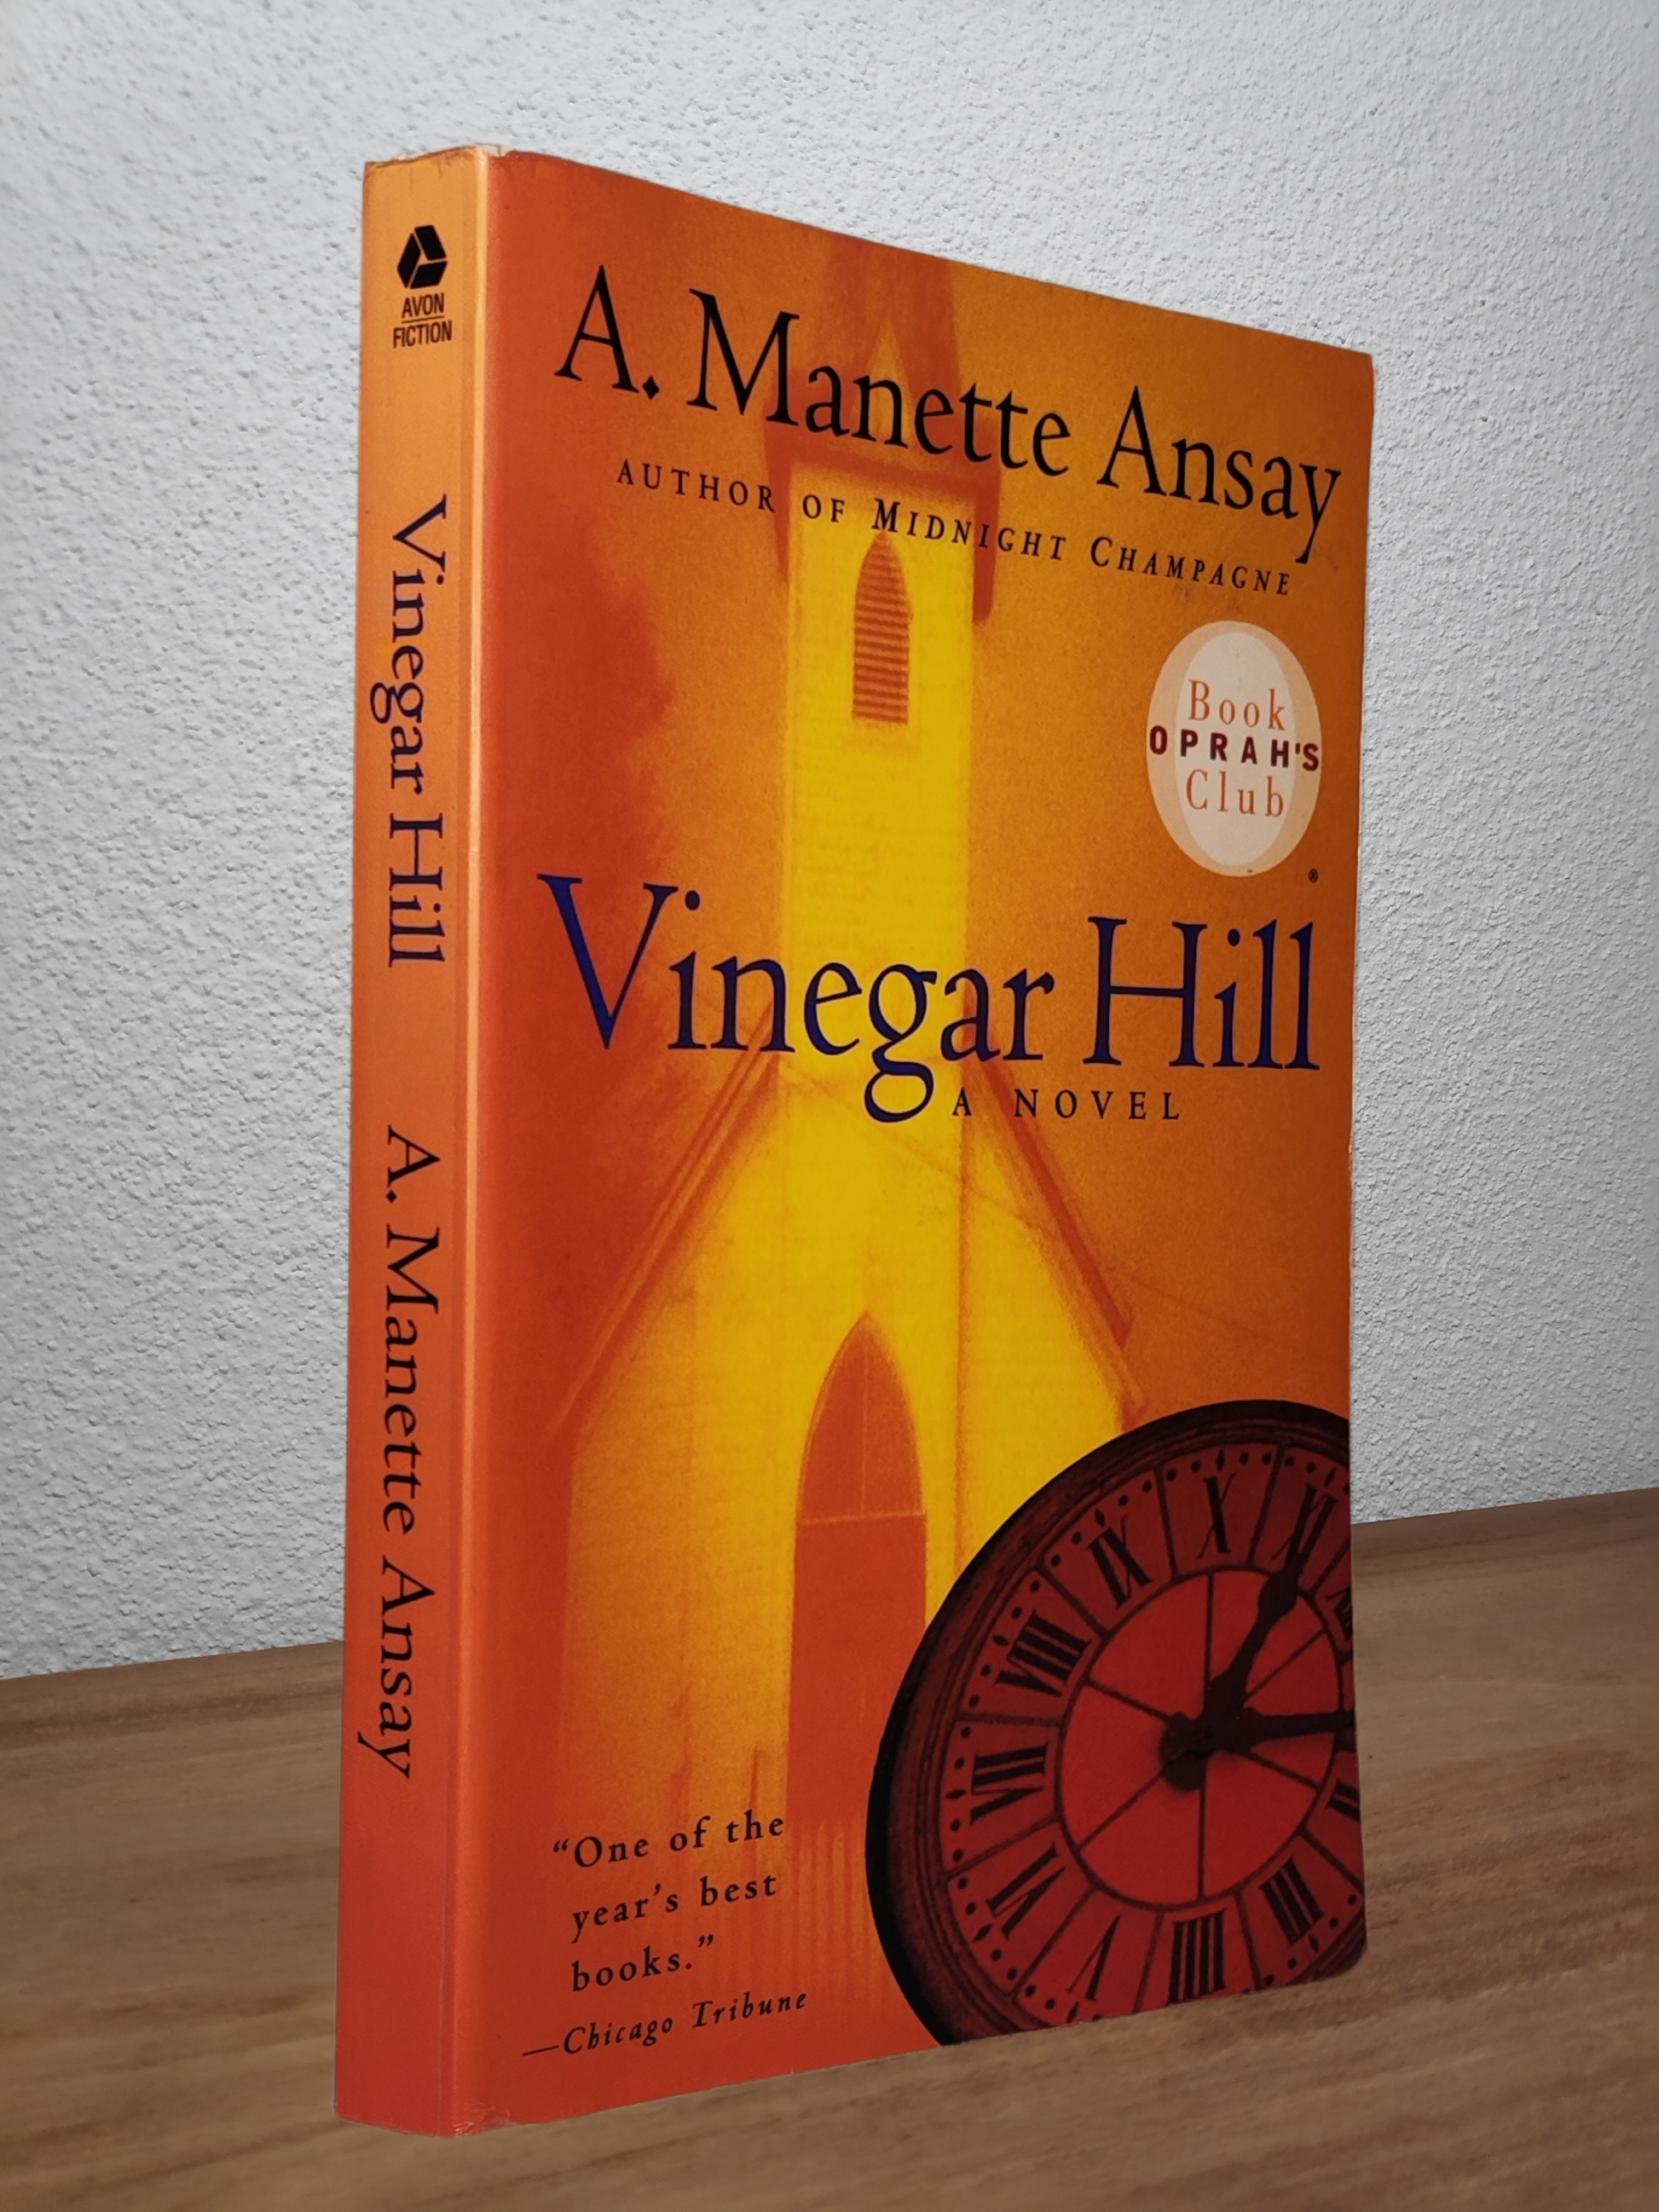 A. Manette Ansay - Vinegar Hill  - Second-hand english book to deliver in Zurich & Switzerland